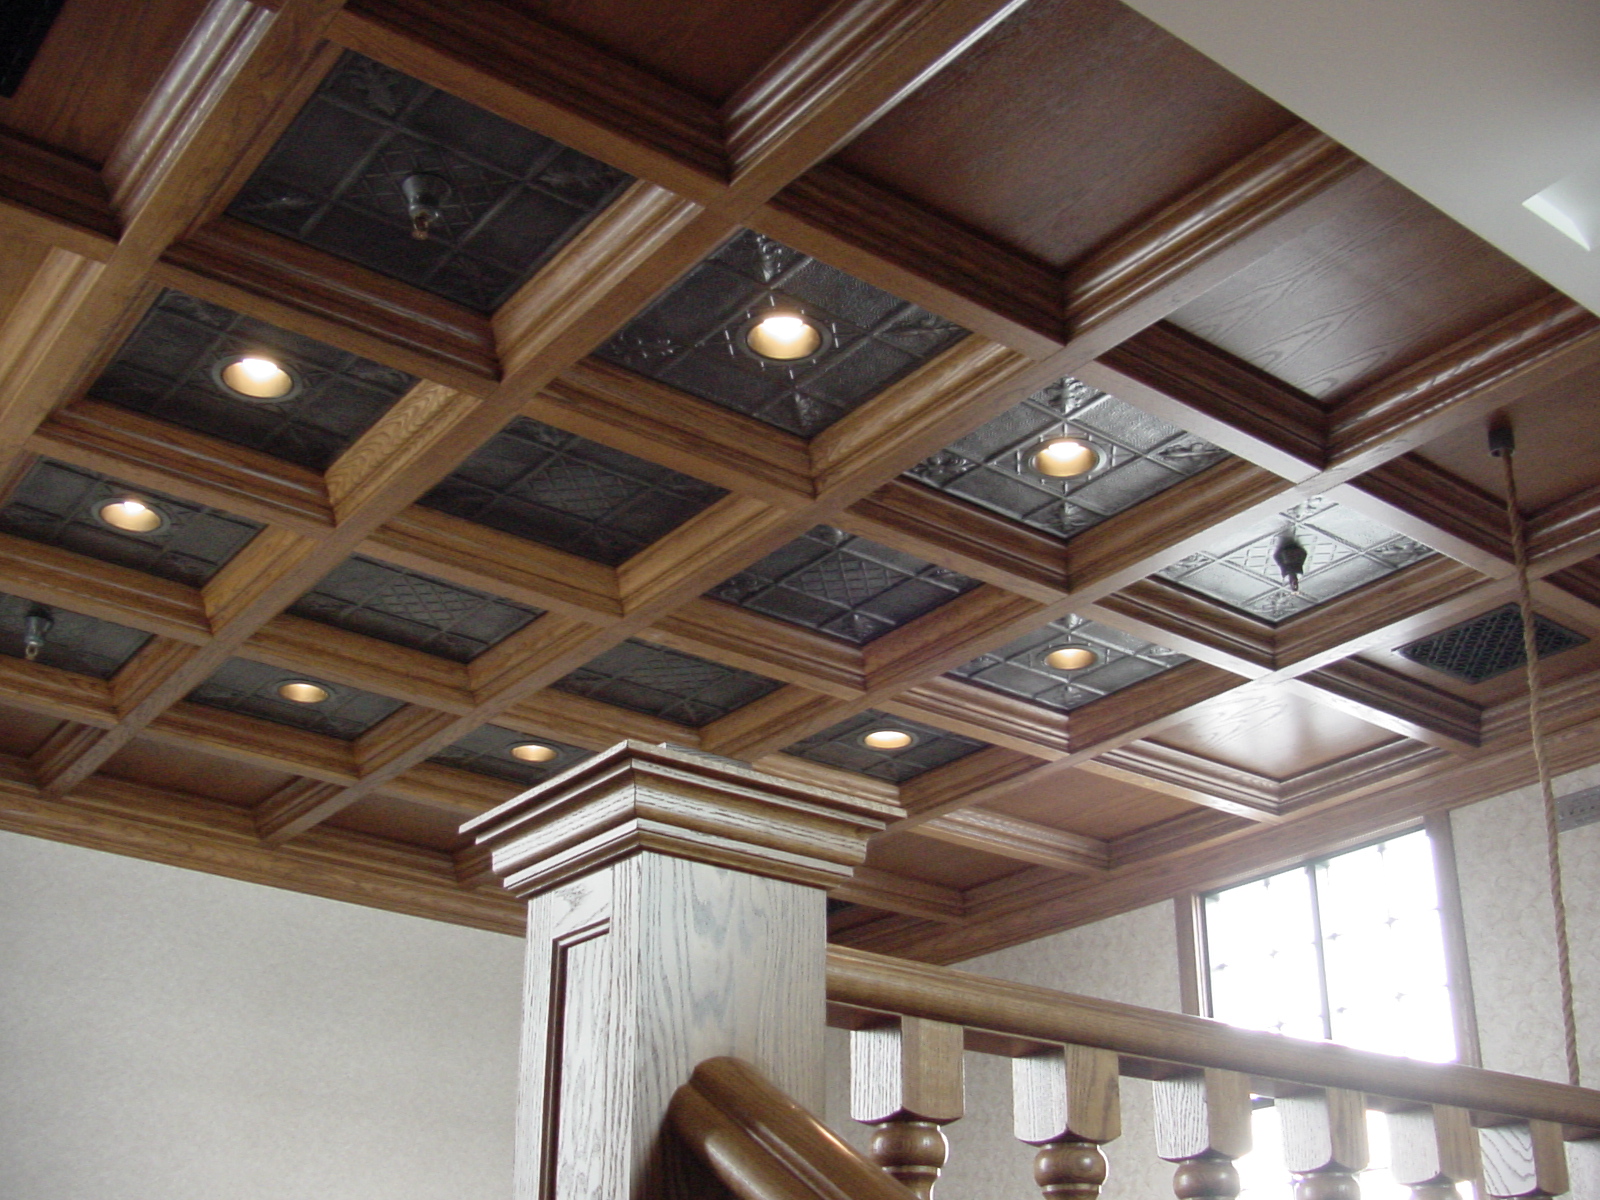 Wood Ceiling In Loft With Tin Panels Woodgrid Coffered Ceilings